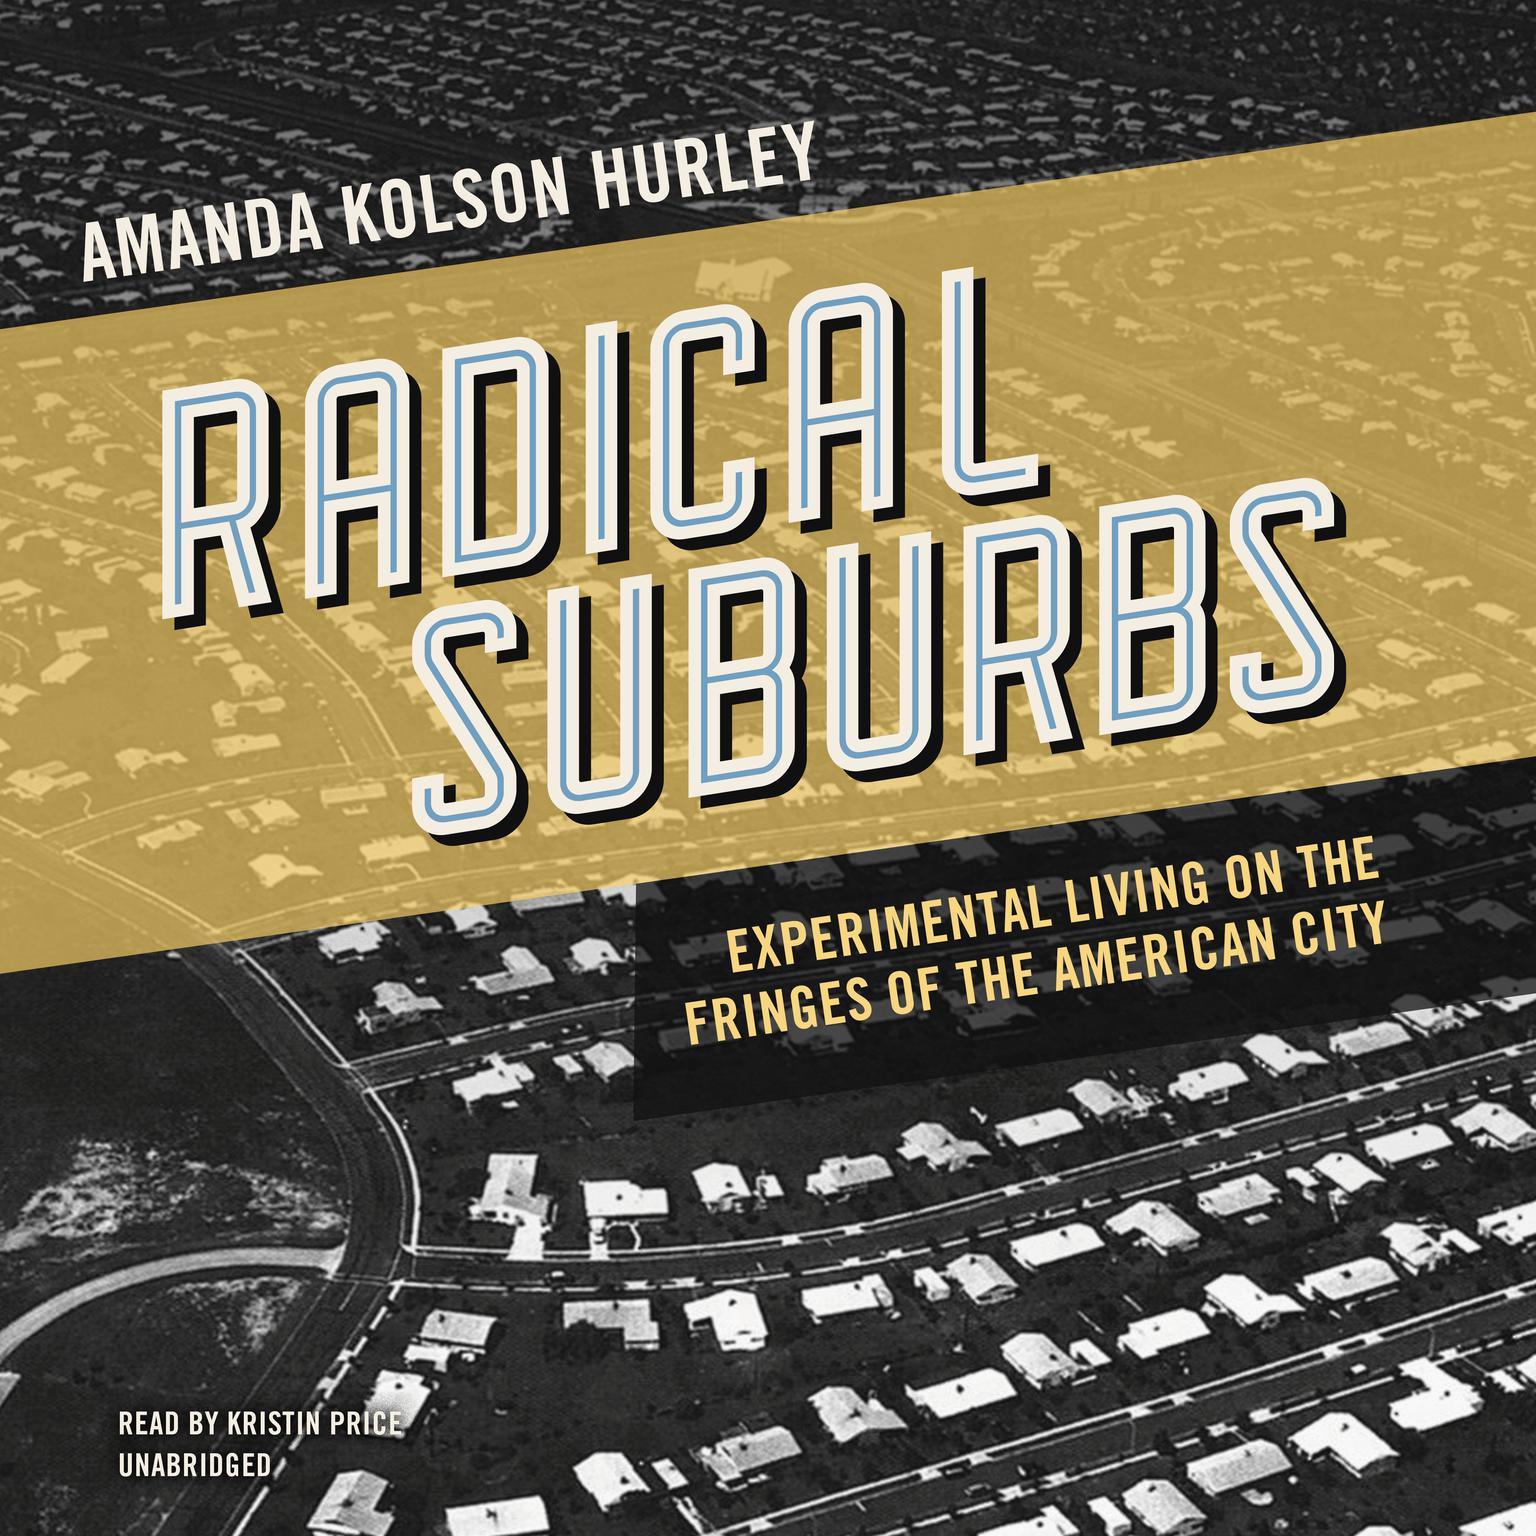 Radical Suburbs: Experimental Living on the Fringes of the American City Audiobook, by Amanda Kolson Hurley